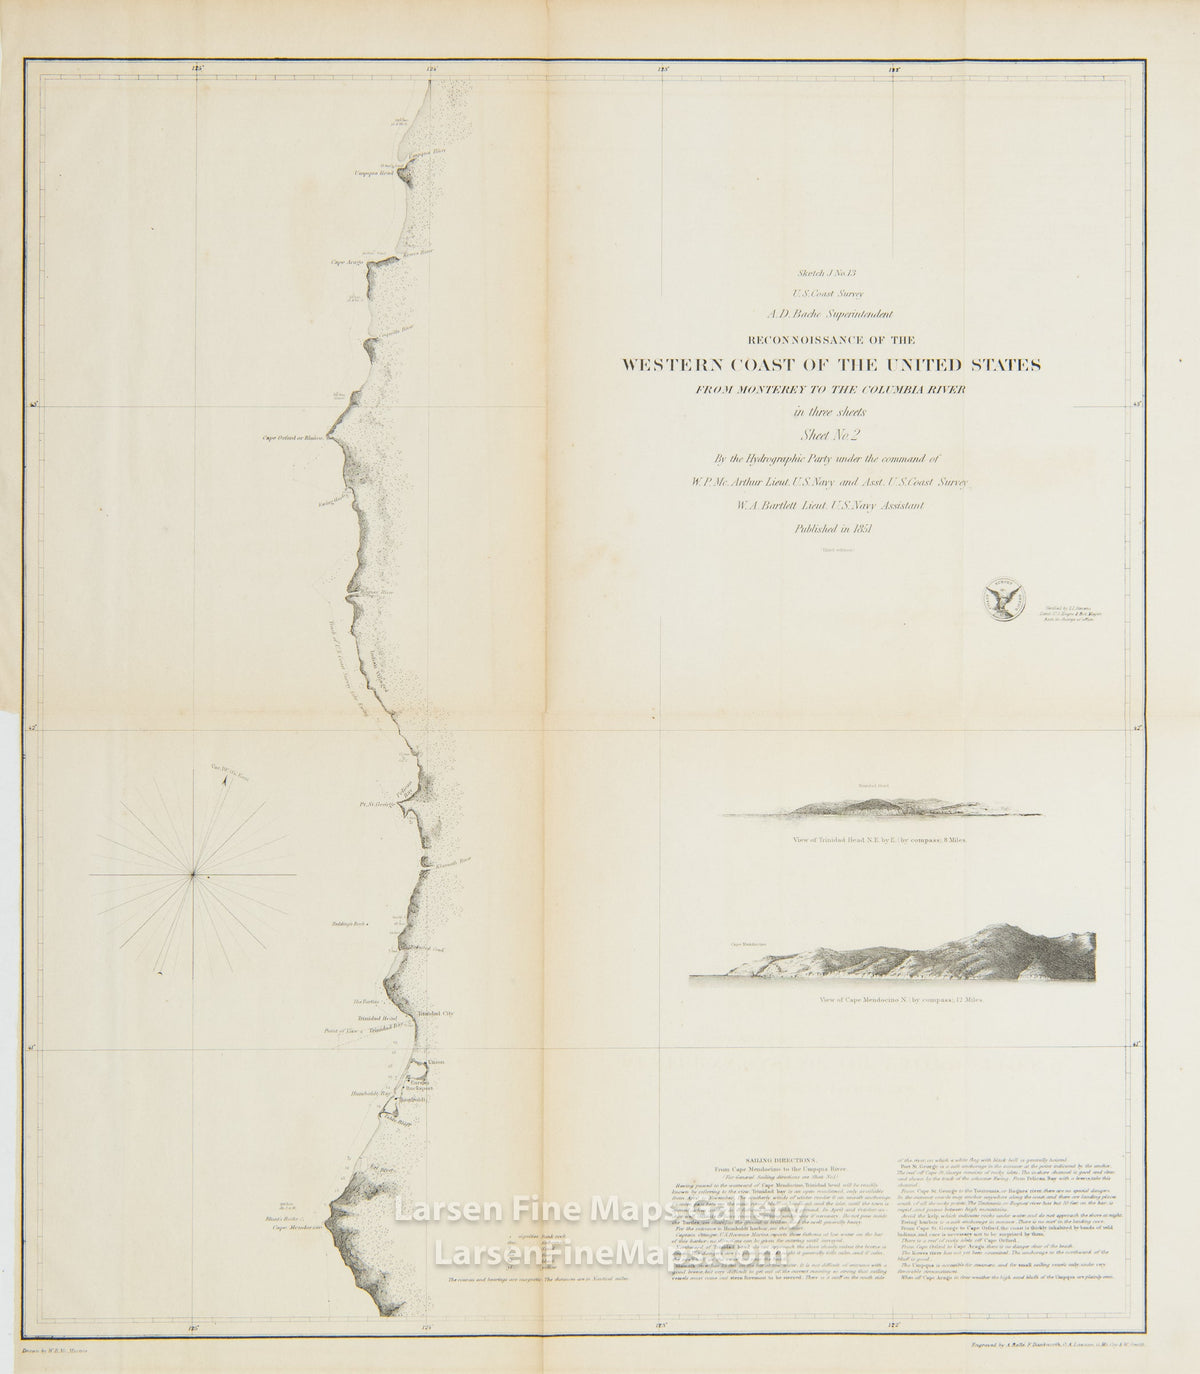 Reconnaissance of the Western Coast of The United States From Monterey to the Columbia River in three sheets, Sheet No. 2